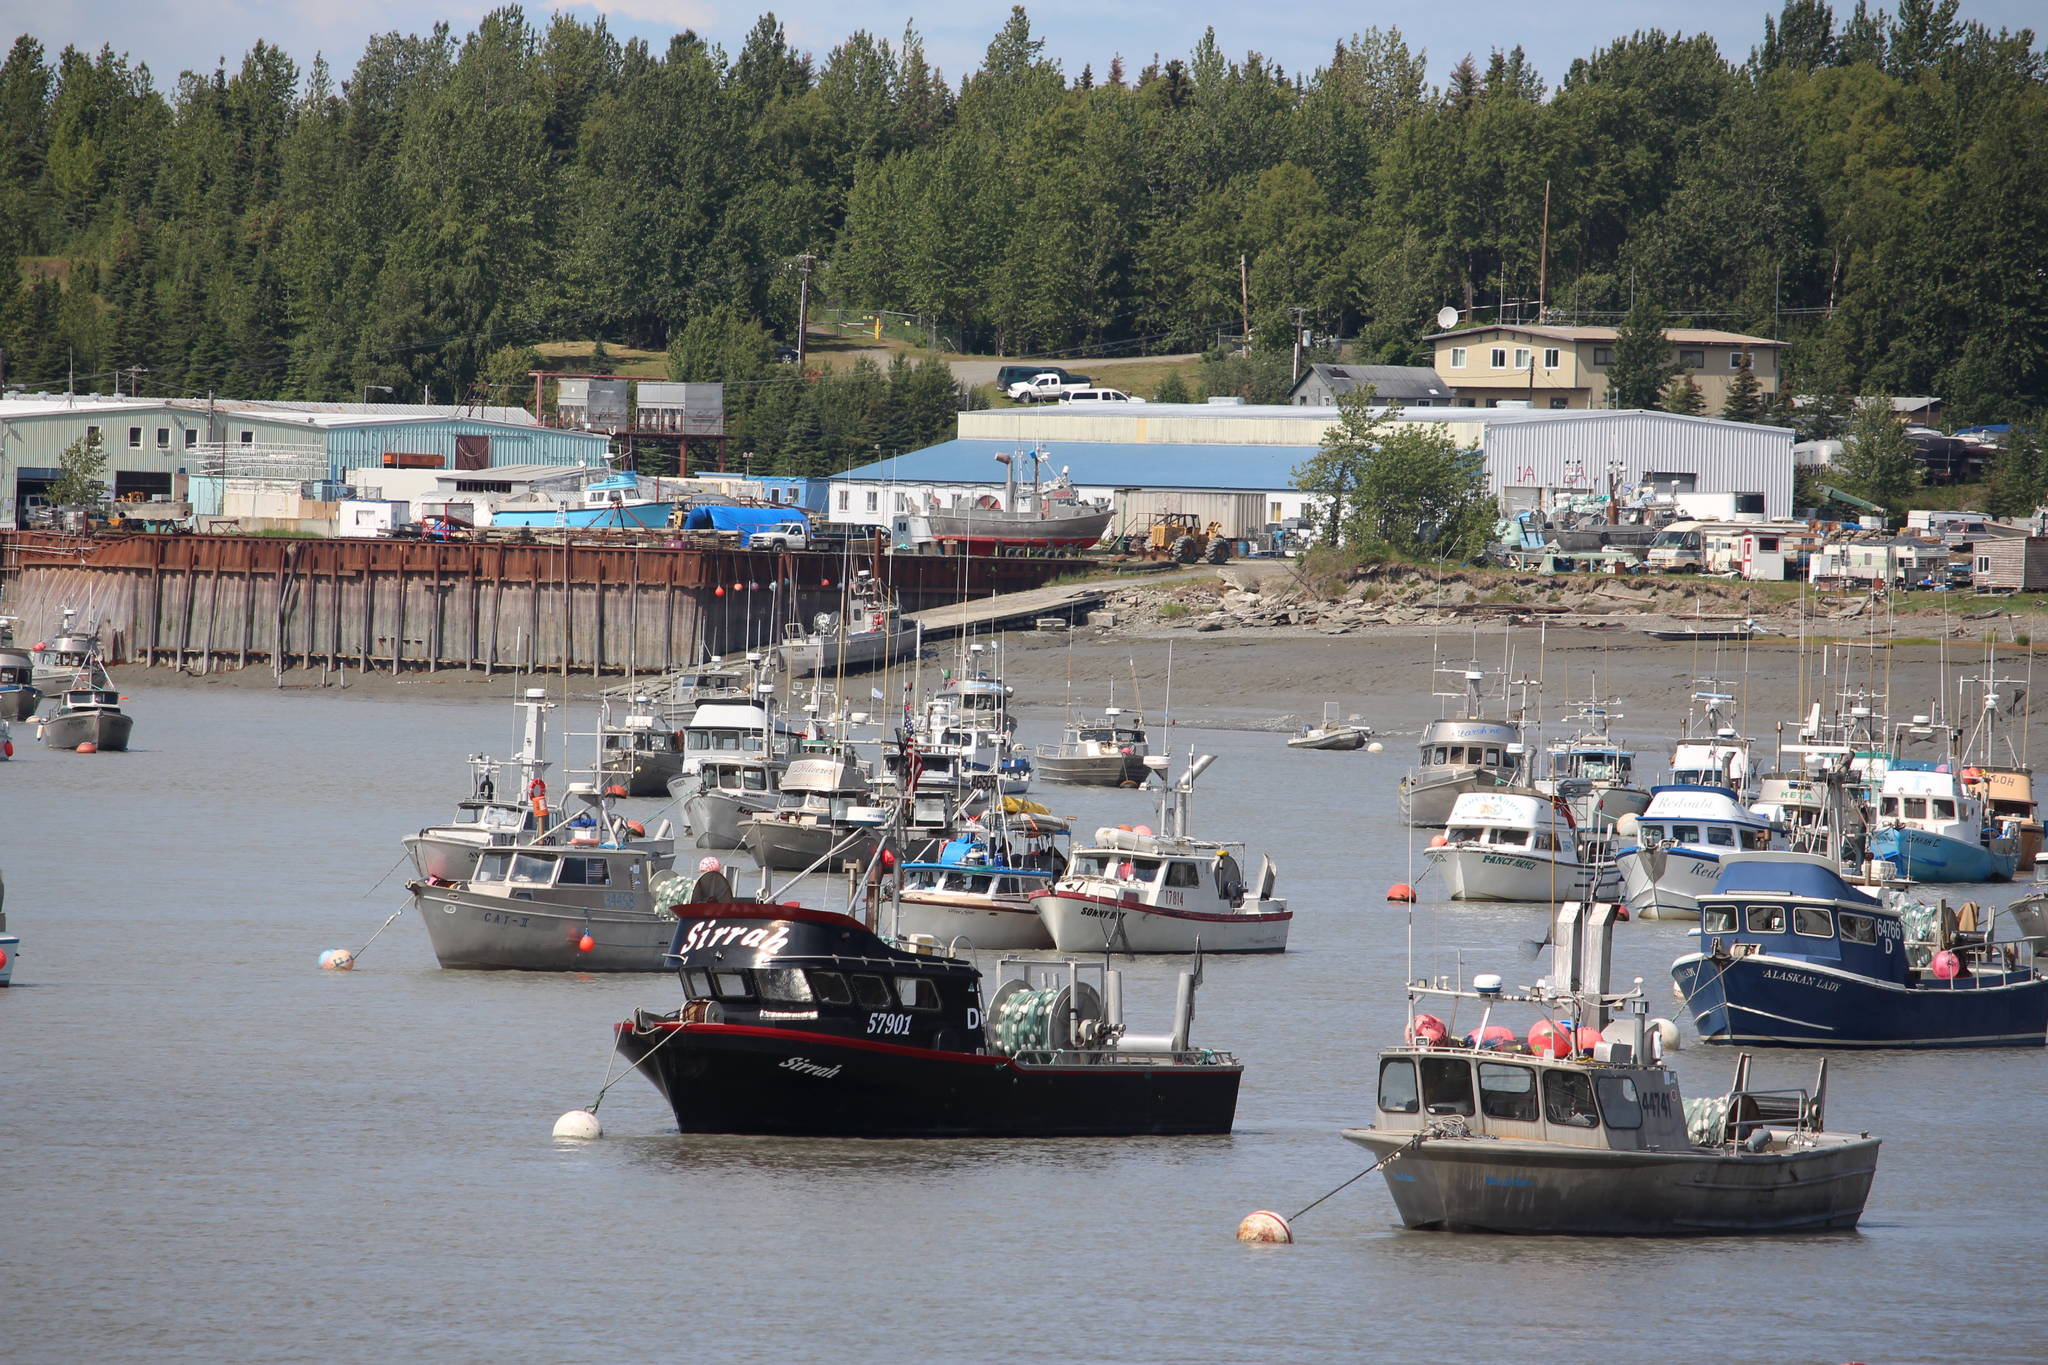 Commercial fishing vessels are moored in the Kenai harbor on July 10, 2020. (Photo by Brian Mazurek/Peninsula Clarion)